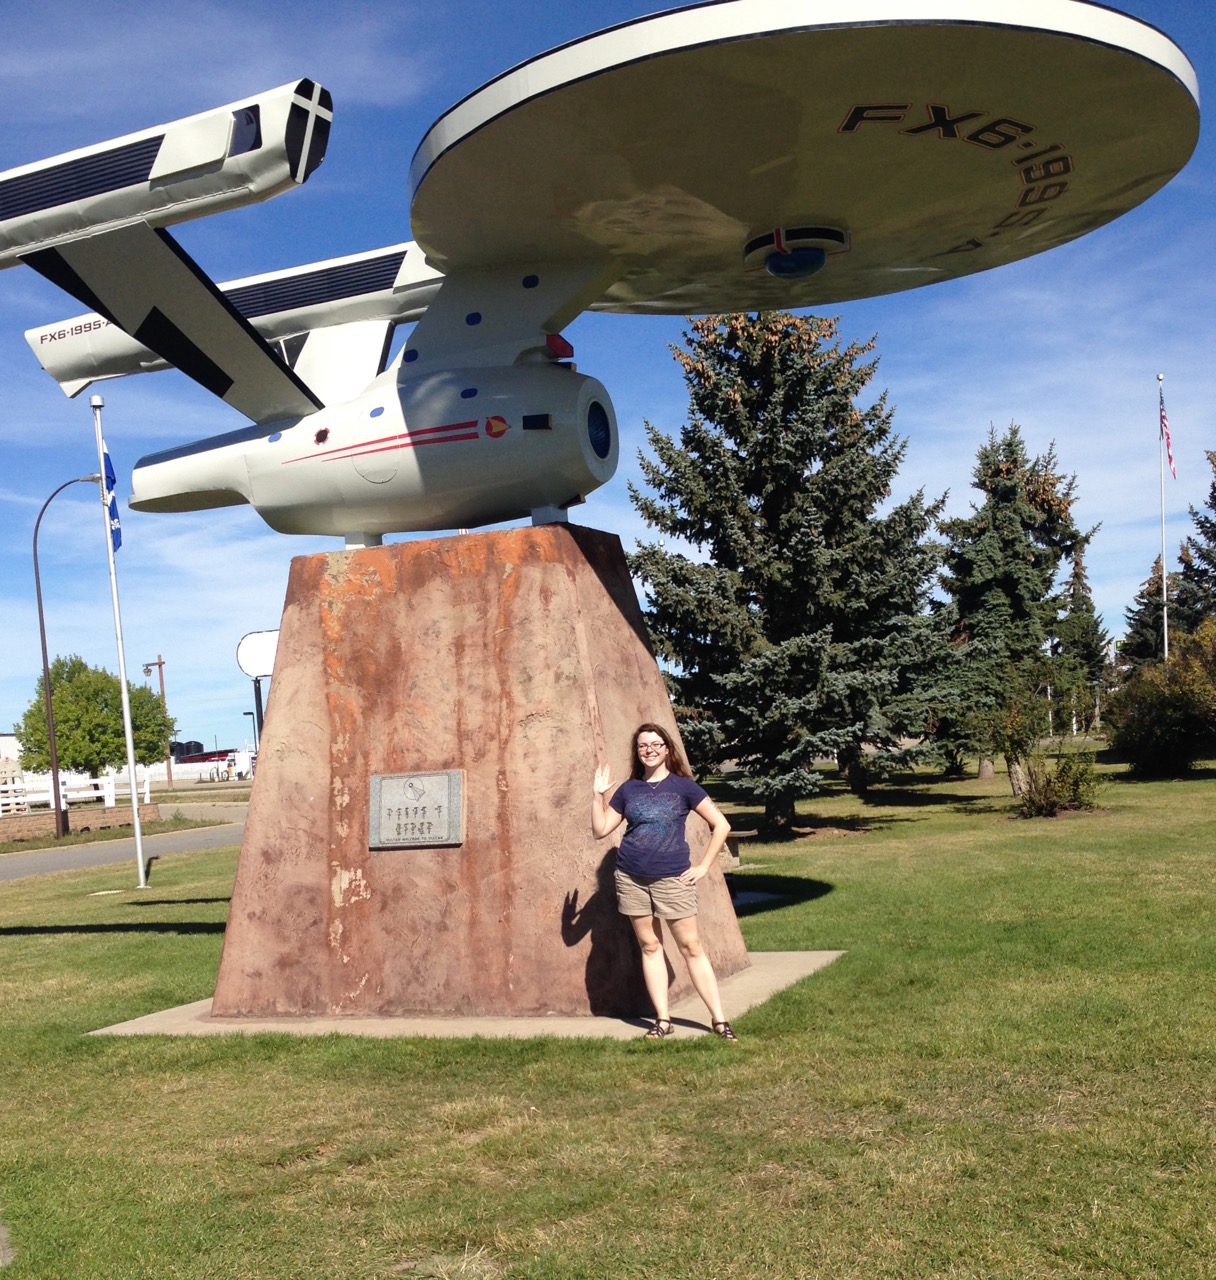 Me with the giant USS Enterprise just off the highway in Vulcan, Alberta